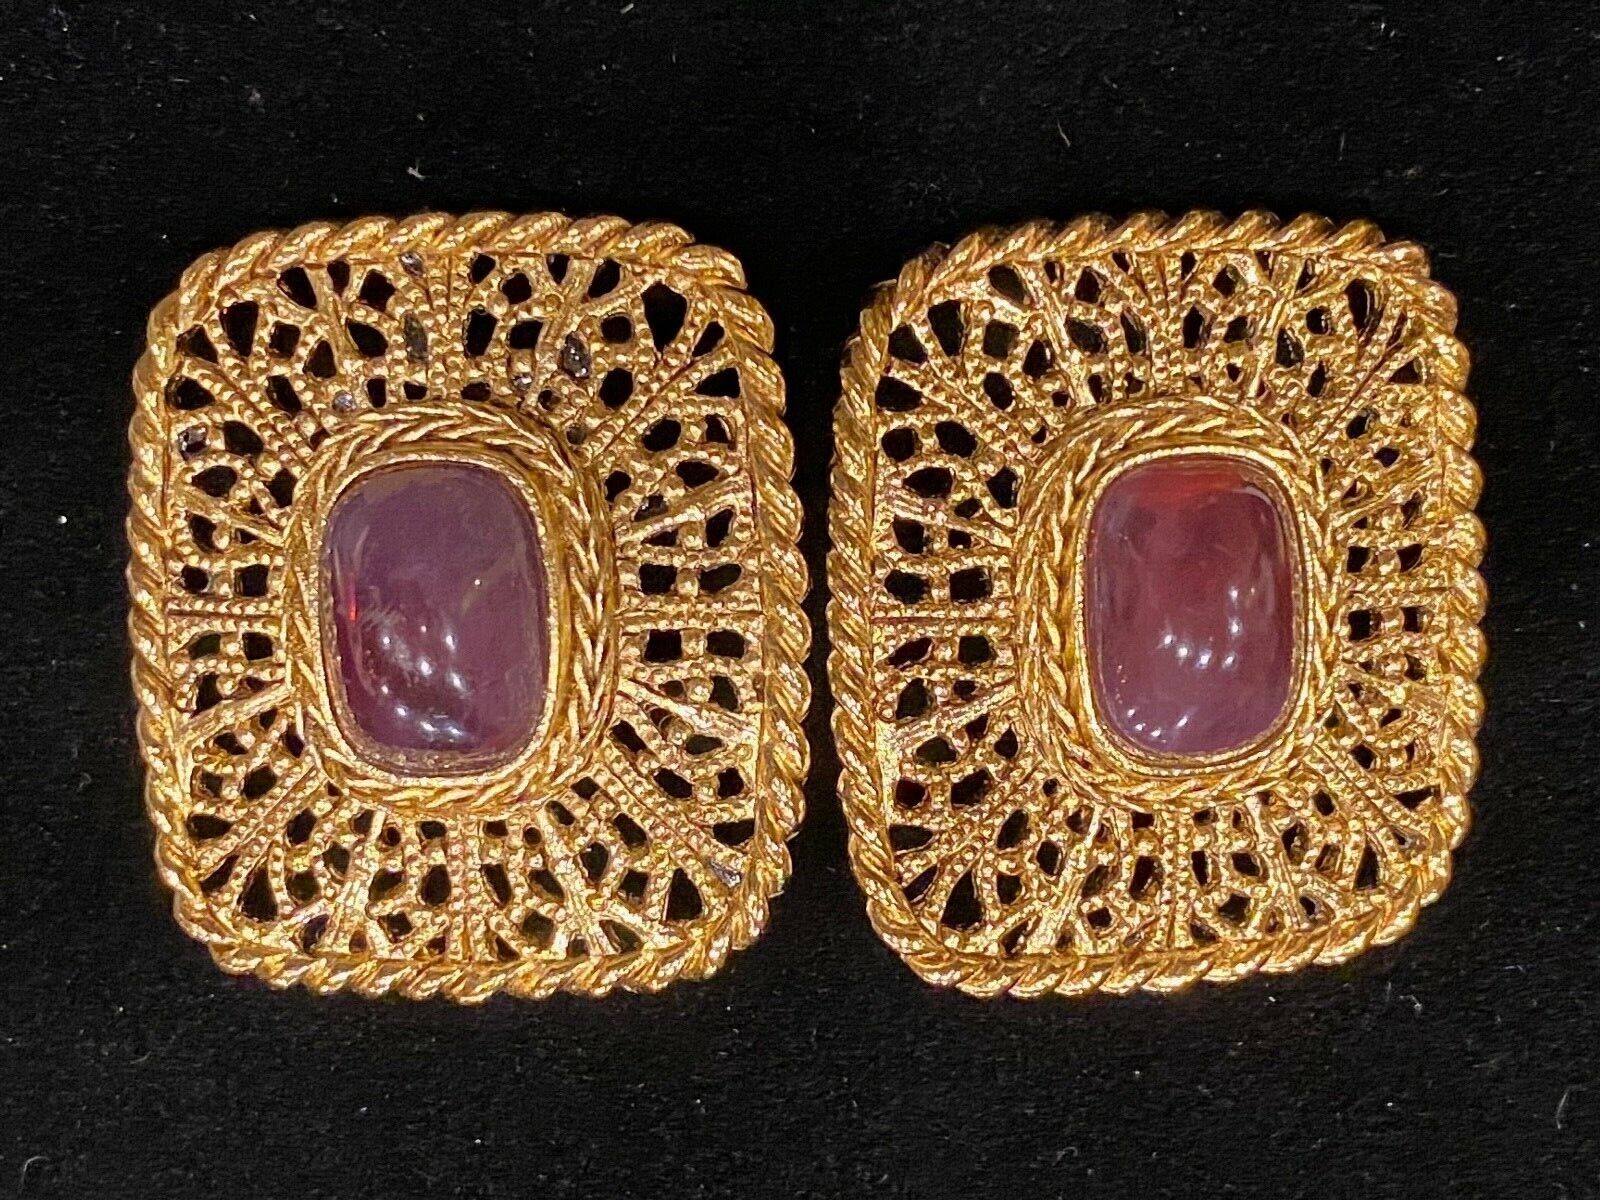 Vintage Givenchy Cabochon Ornate Earrings - image 4